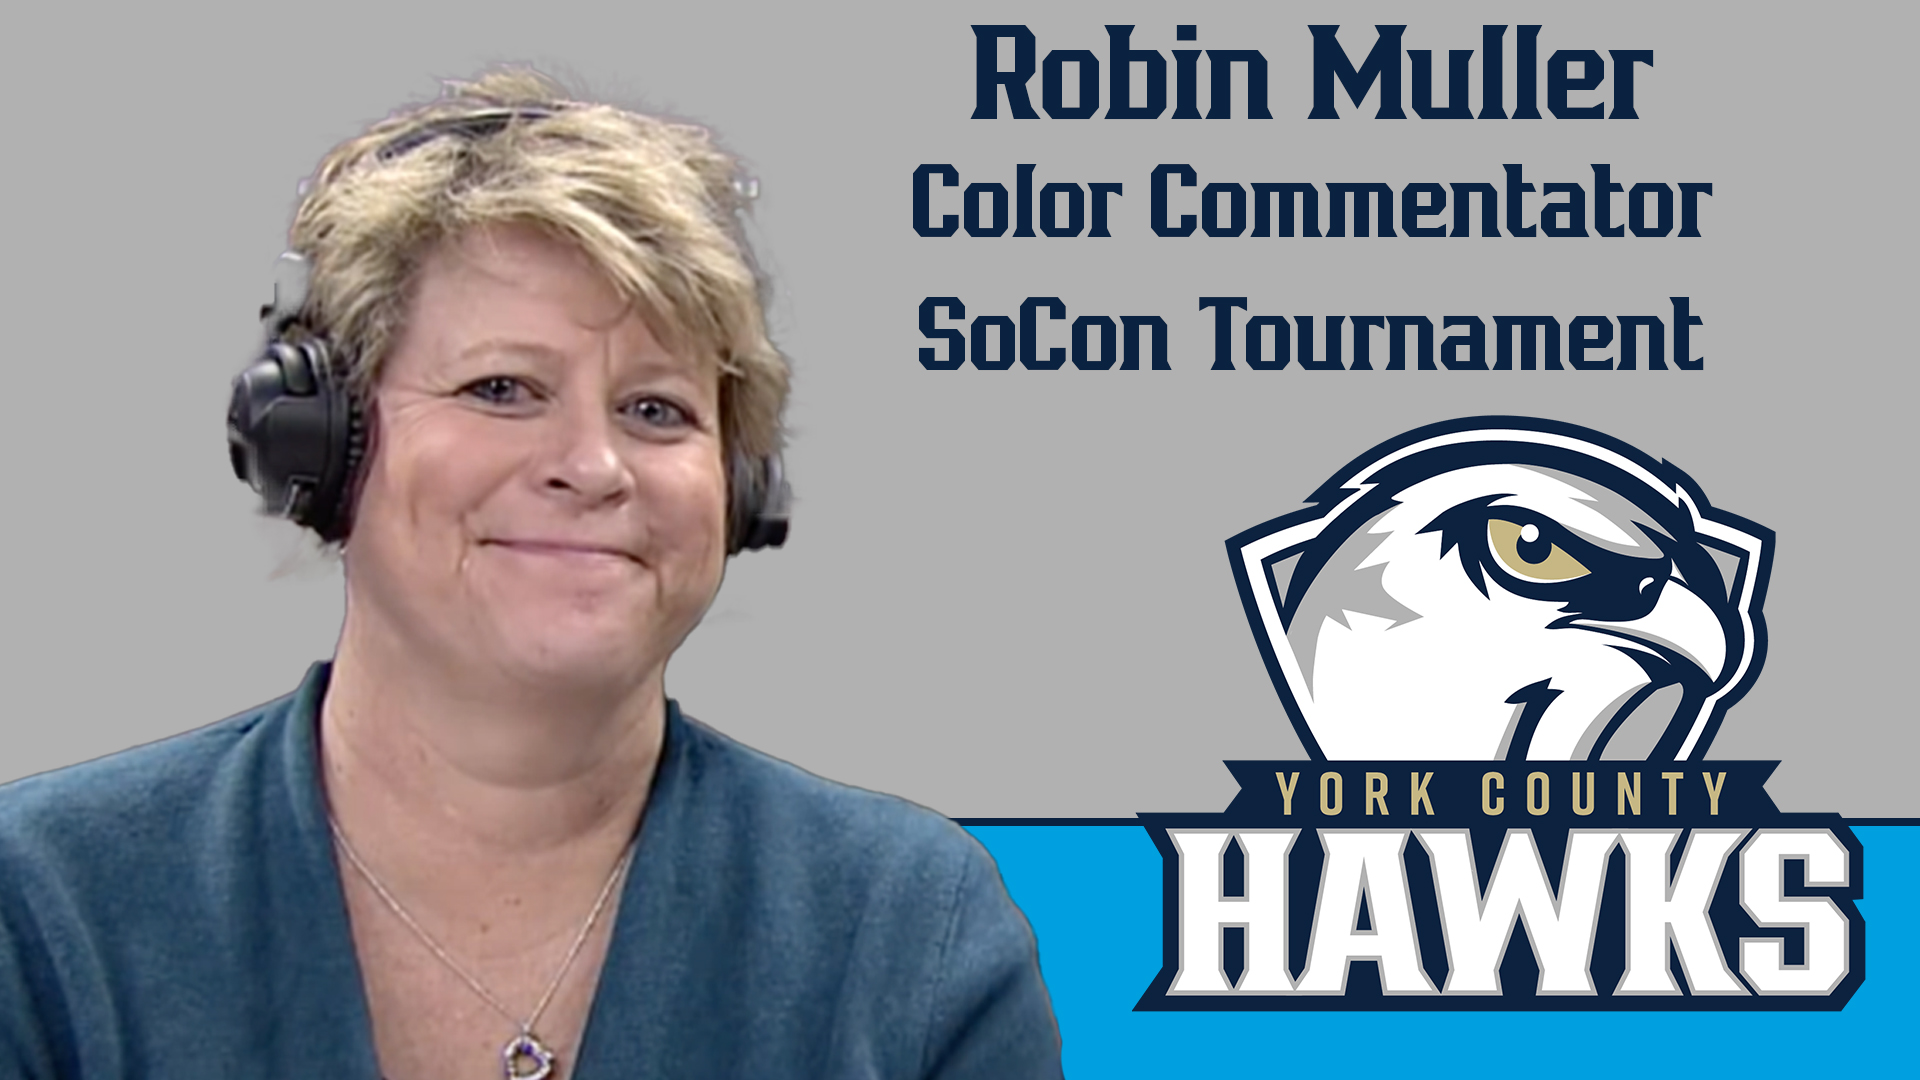 YCCC AD Robin Muller serves as color commentator for the NCAA Southern Conference tournament